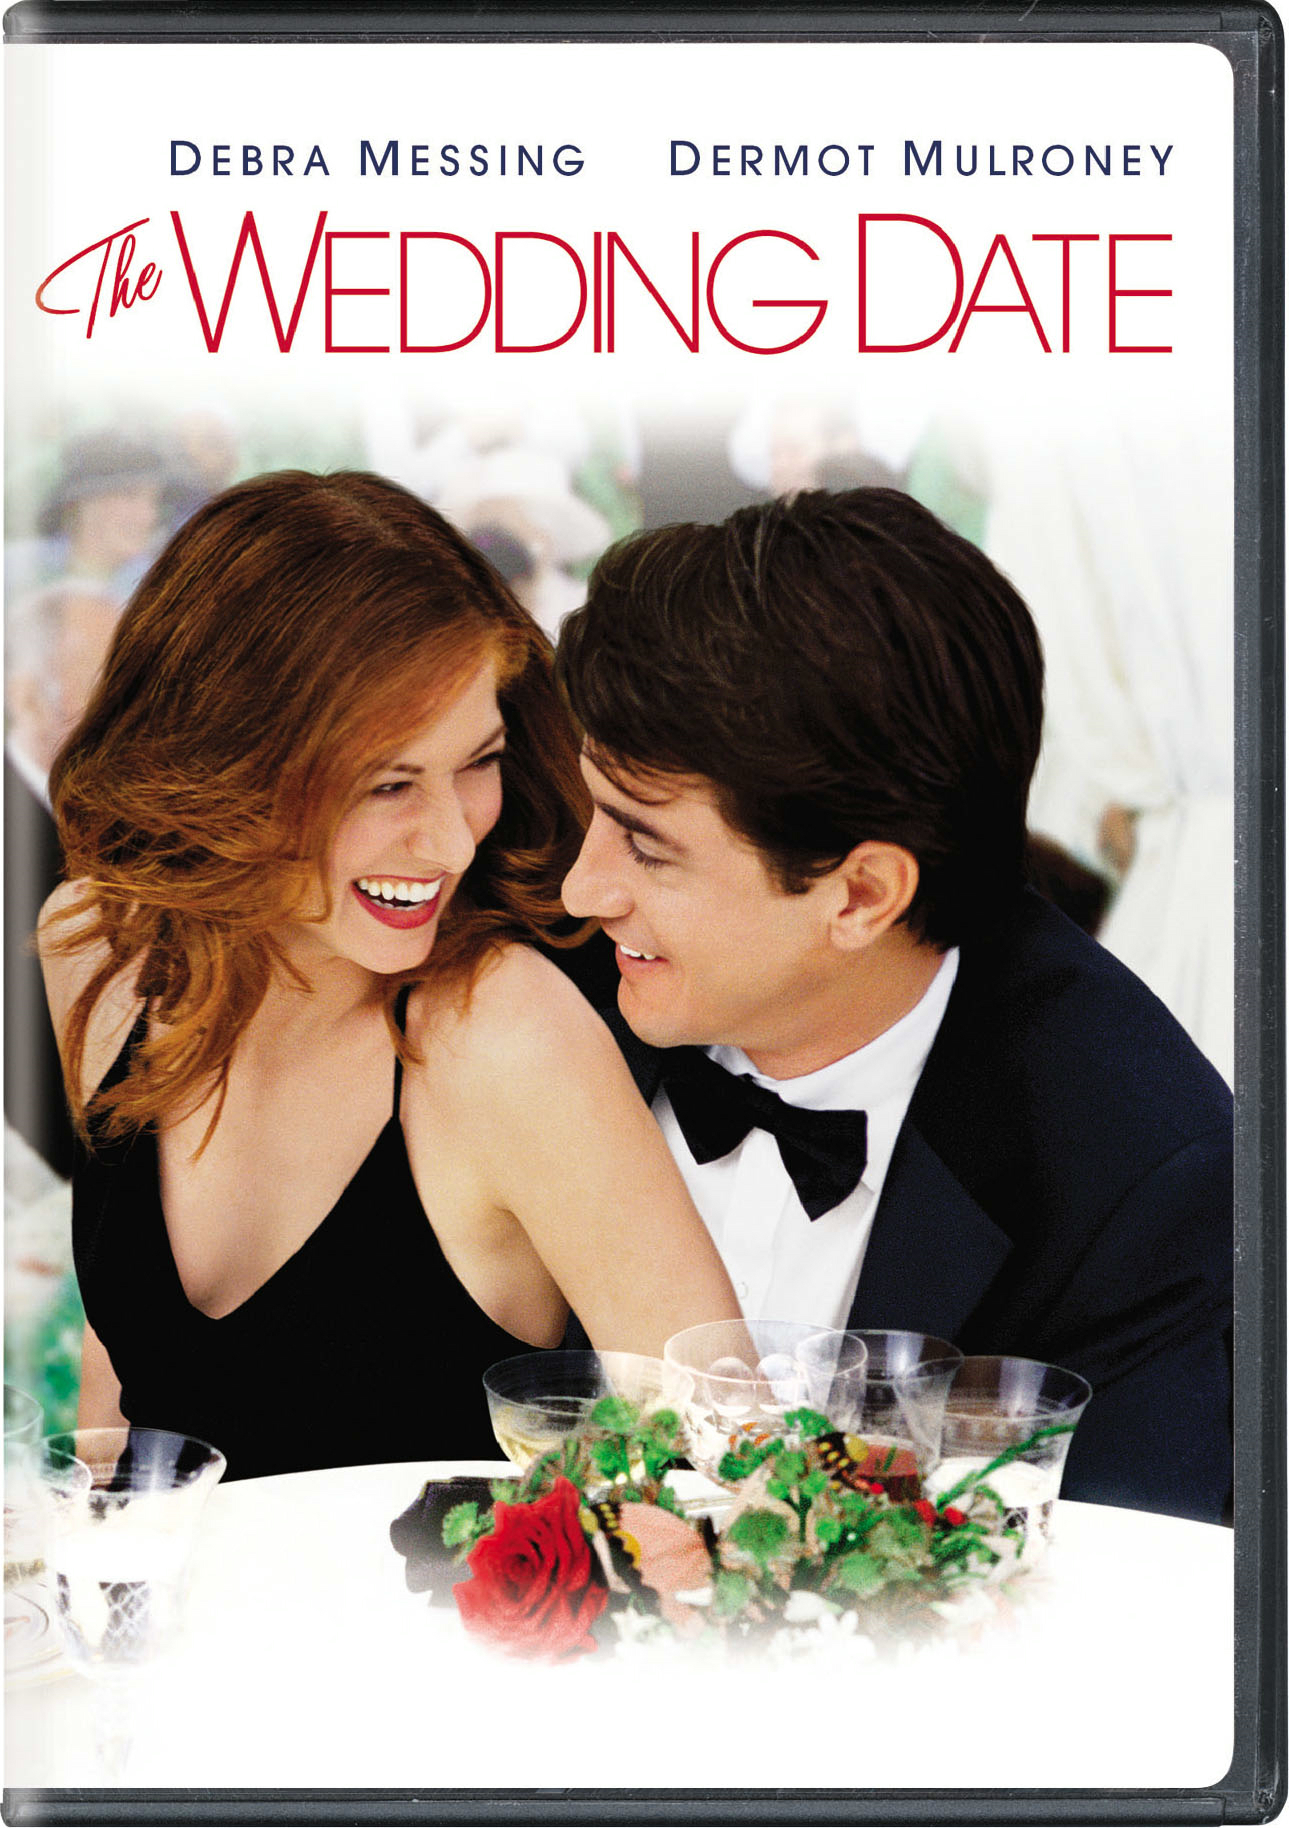 The Wedding Date (DVD Widescreen) - DVD [ 2005 ]  - Comedy Movies On DVD - Movies On GRUV